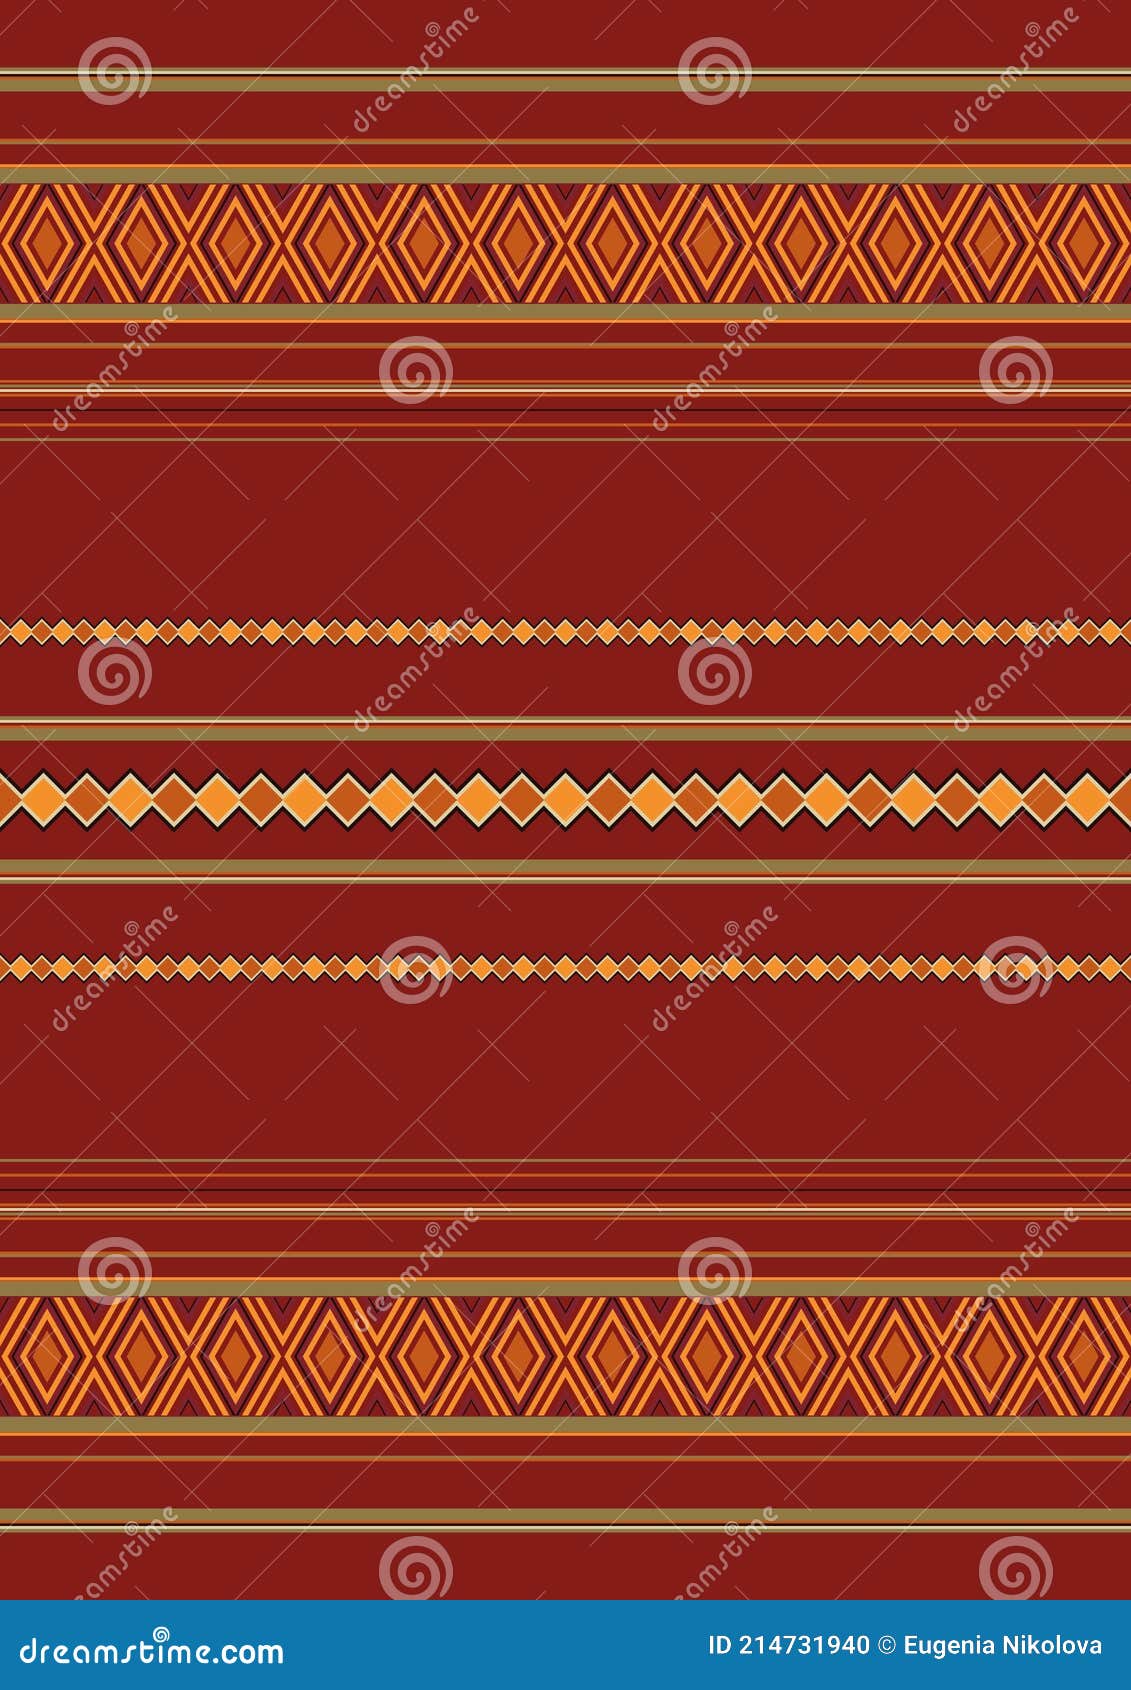 ethnic textile background. mexican striped blanket seamless pattern. native american textile